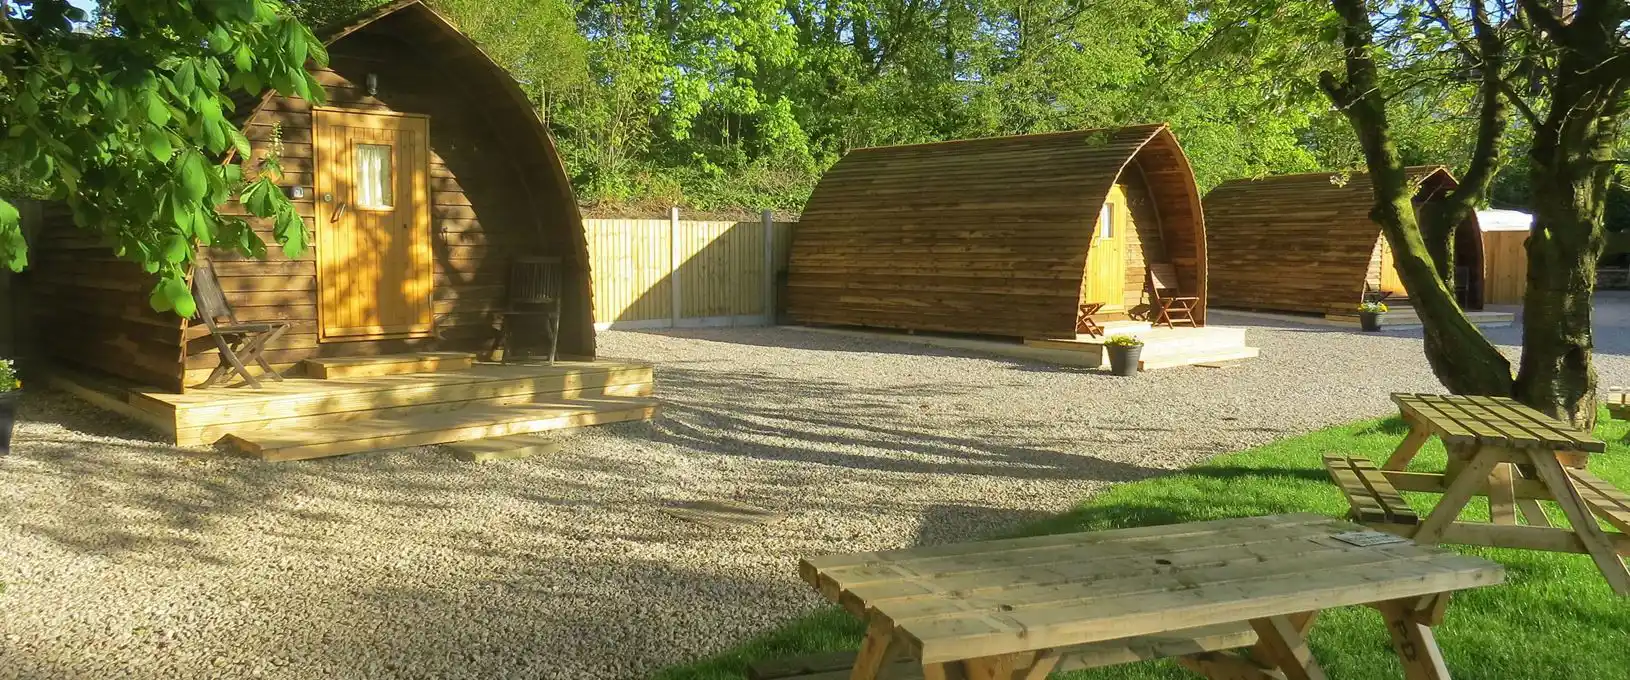 Glamping in West Yorkshire